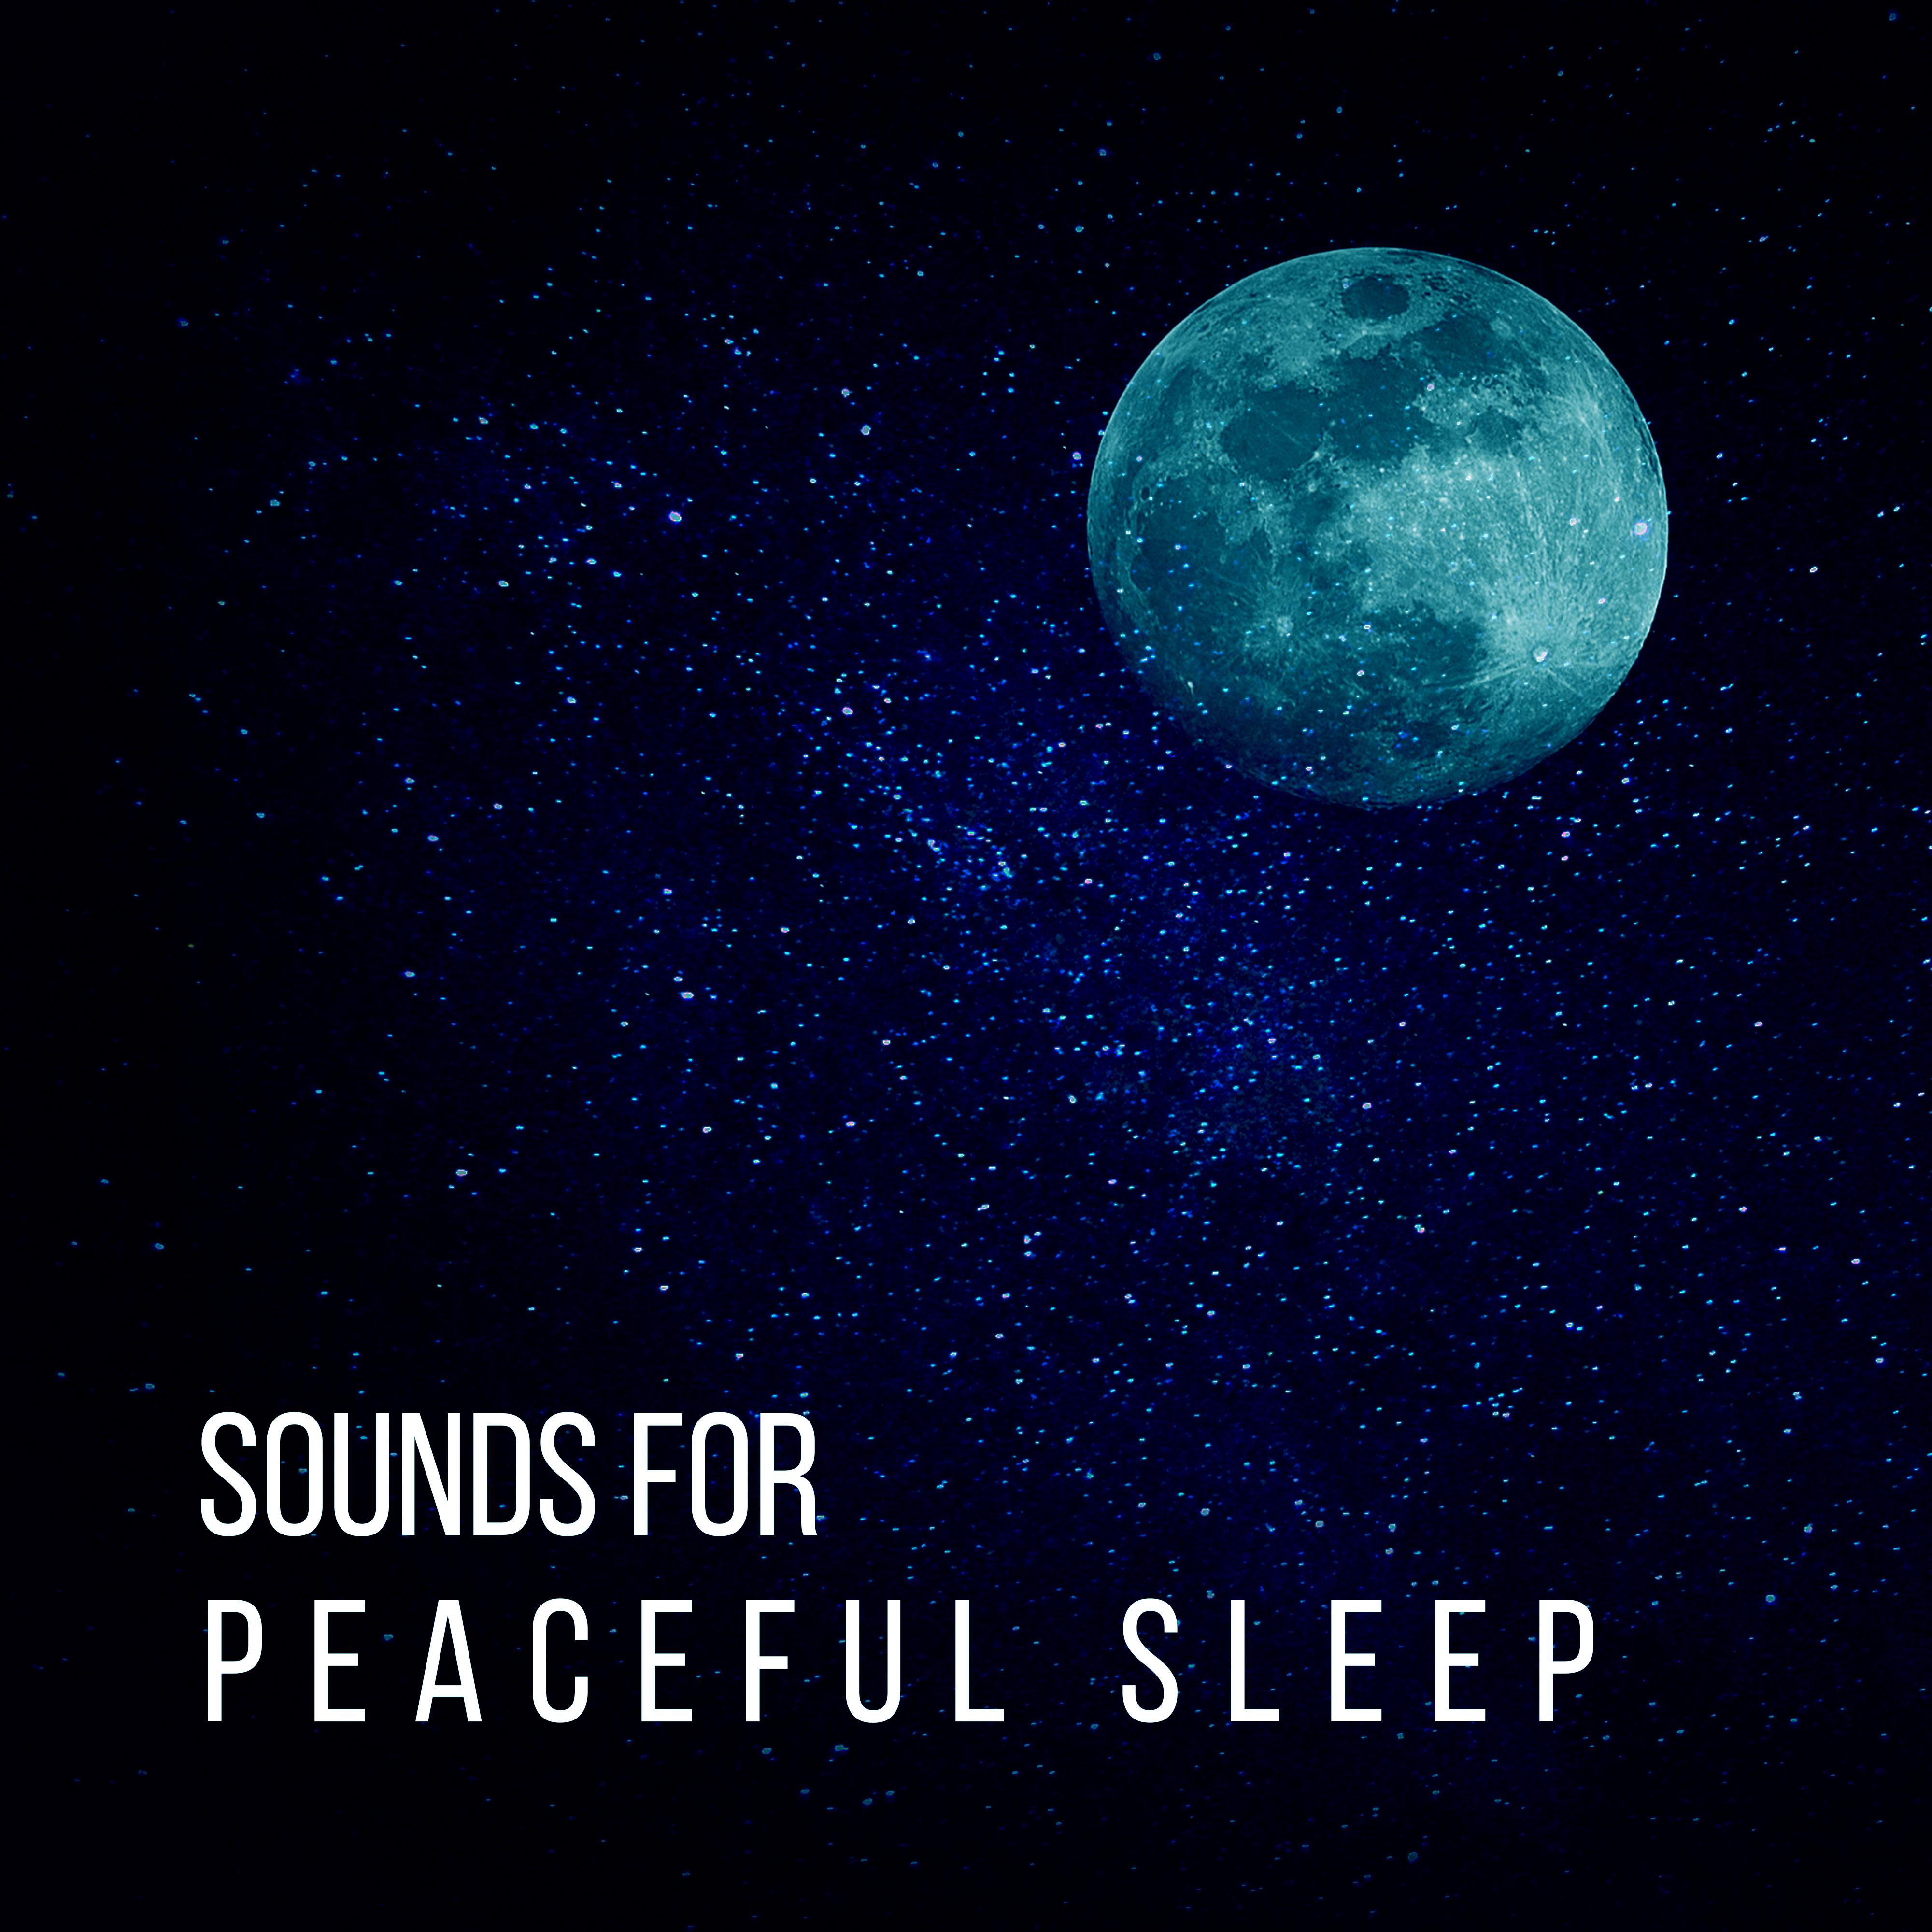 Sounds for Peaceful Sleep  Calm Melodies, Inner Peace, Chilled Sounds, Sleep Well, Night Relaxation